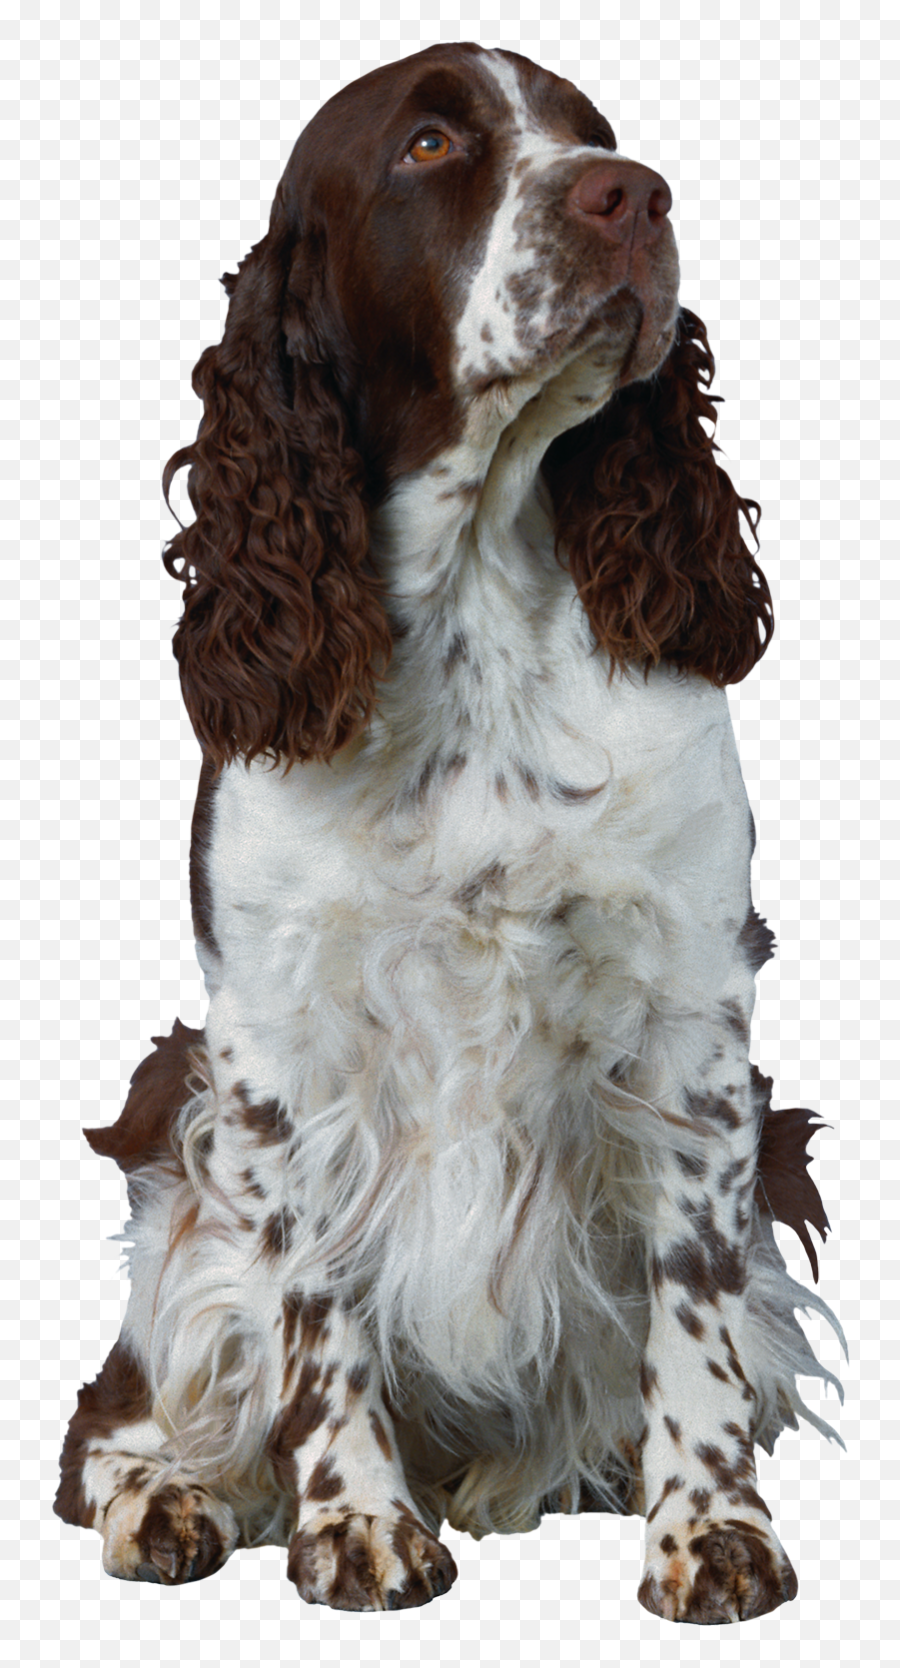 Beautiful Sitting Dog With Long Hair Png Images - Yourpngcom Emoji,Cocker Spaniel Emojis For Messenger